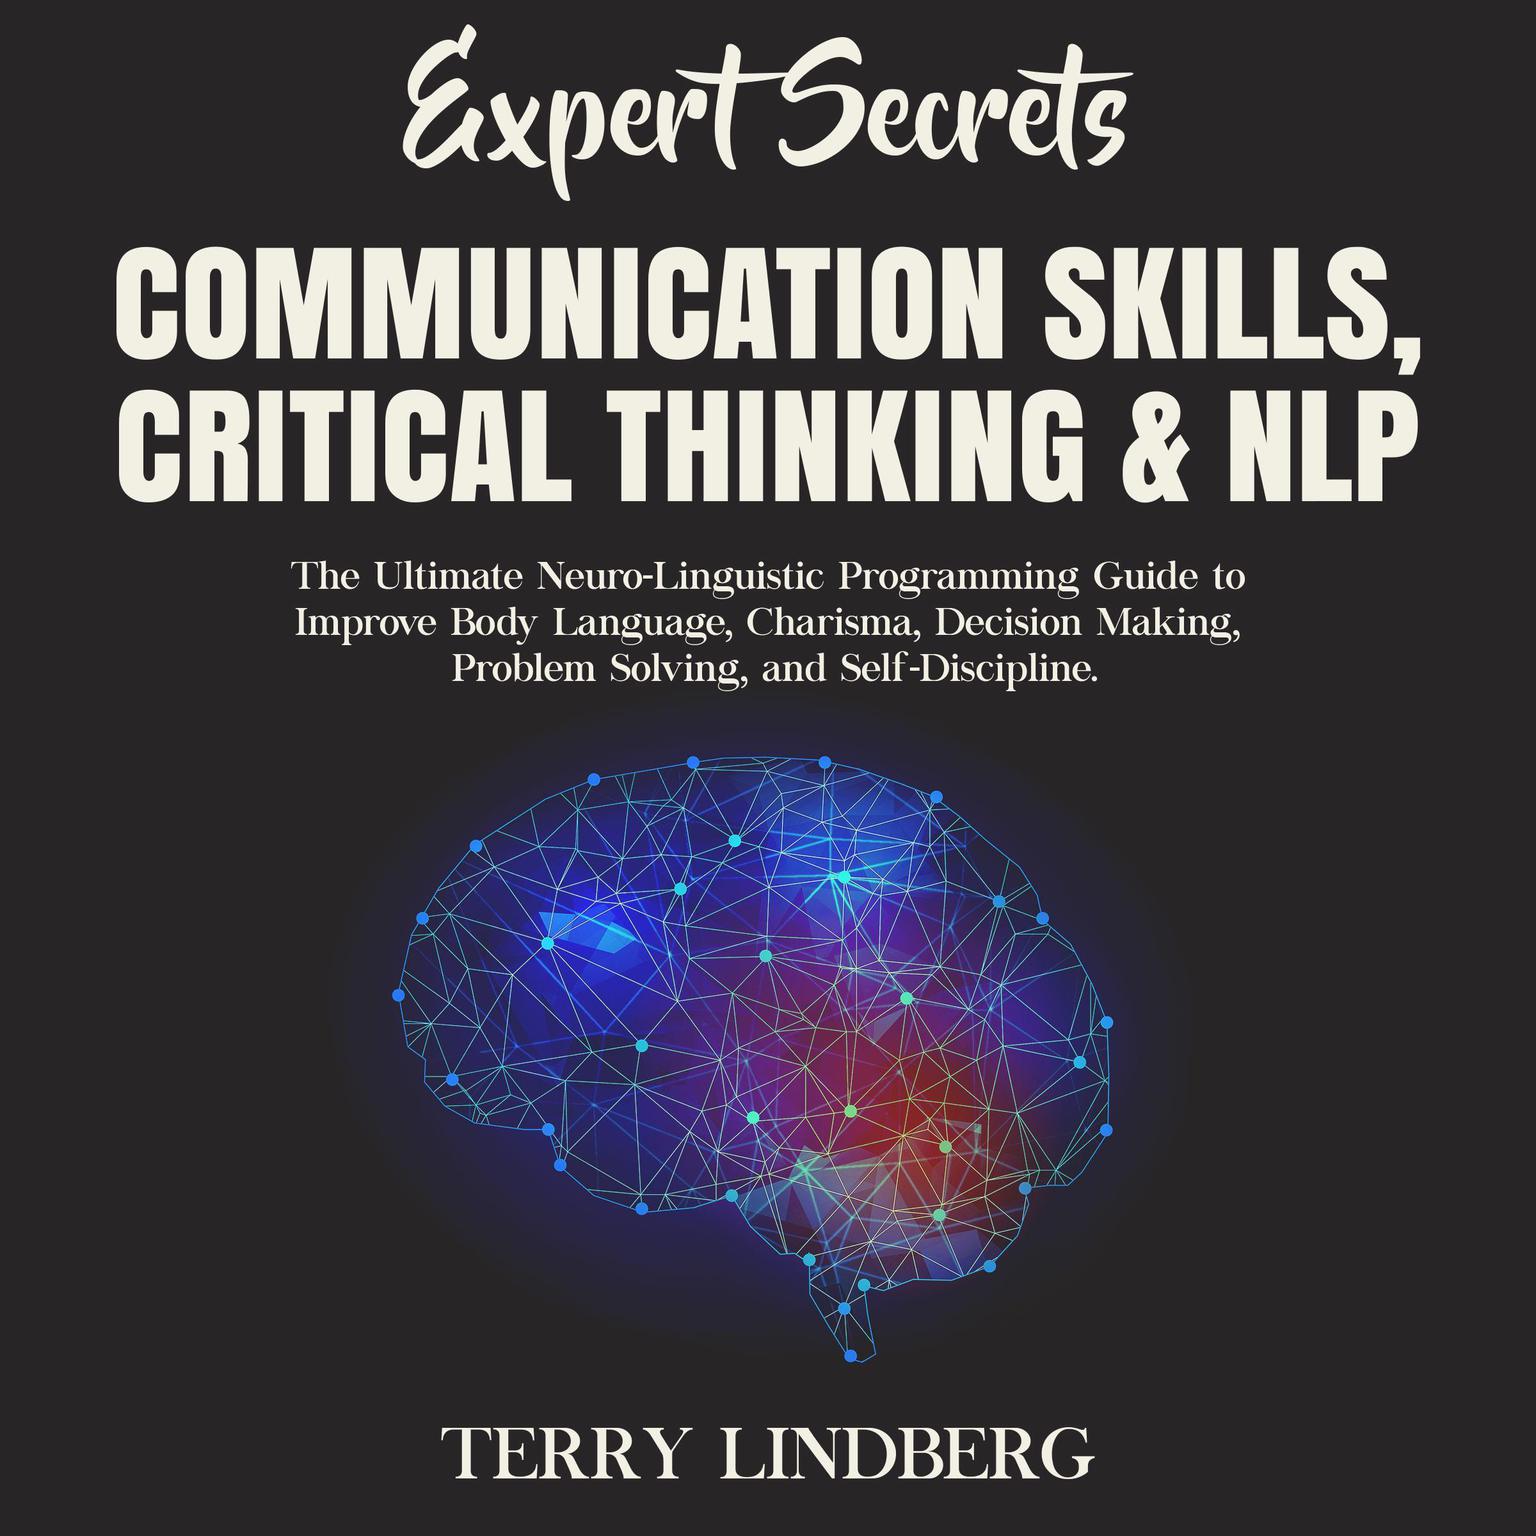 Expert Secrets – Communication Skills, Critical Thinking & NLP: The Ultimate Neuro-Linguistic Programming Guide to Improve Body Language, Charisma, Decision Making, Problem Solving, and Self-Discipline. Audiobook, by Terry Lindberg